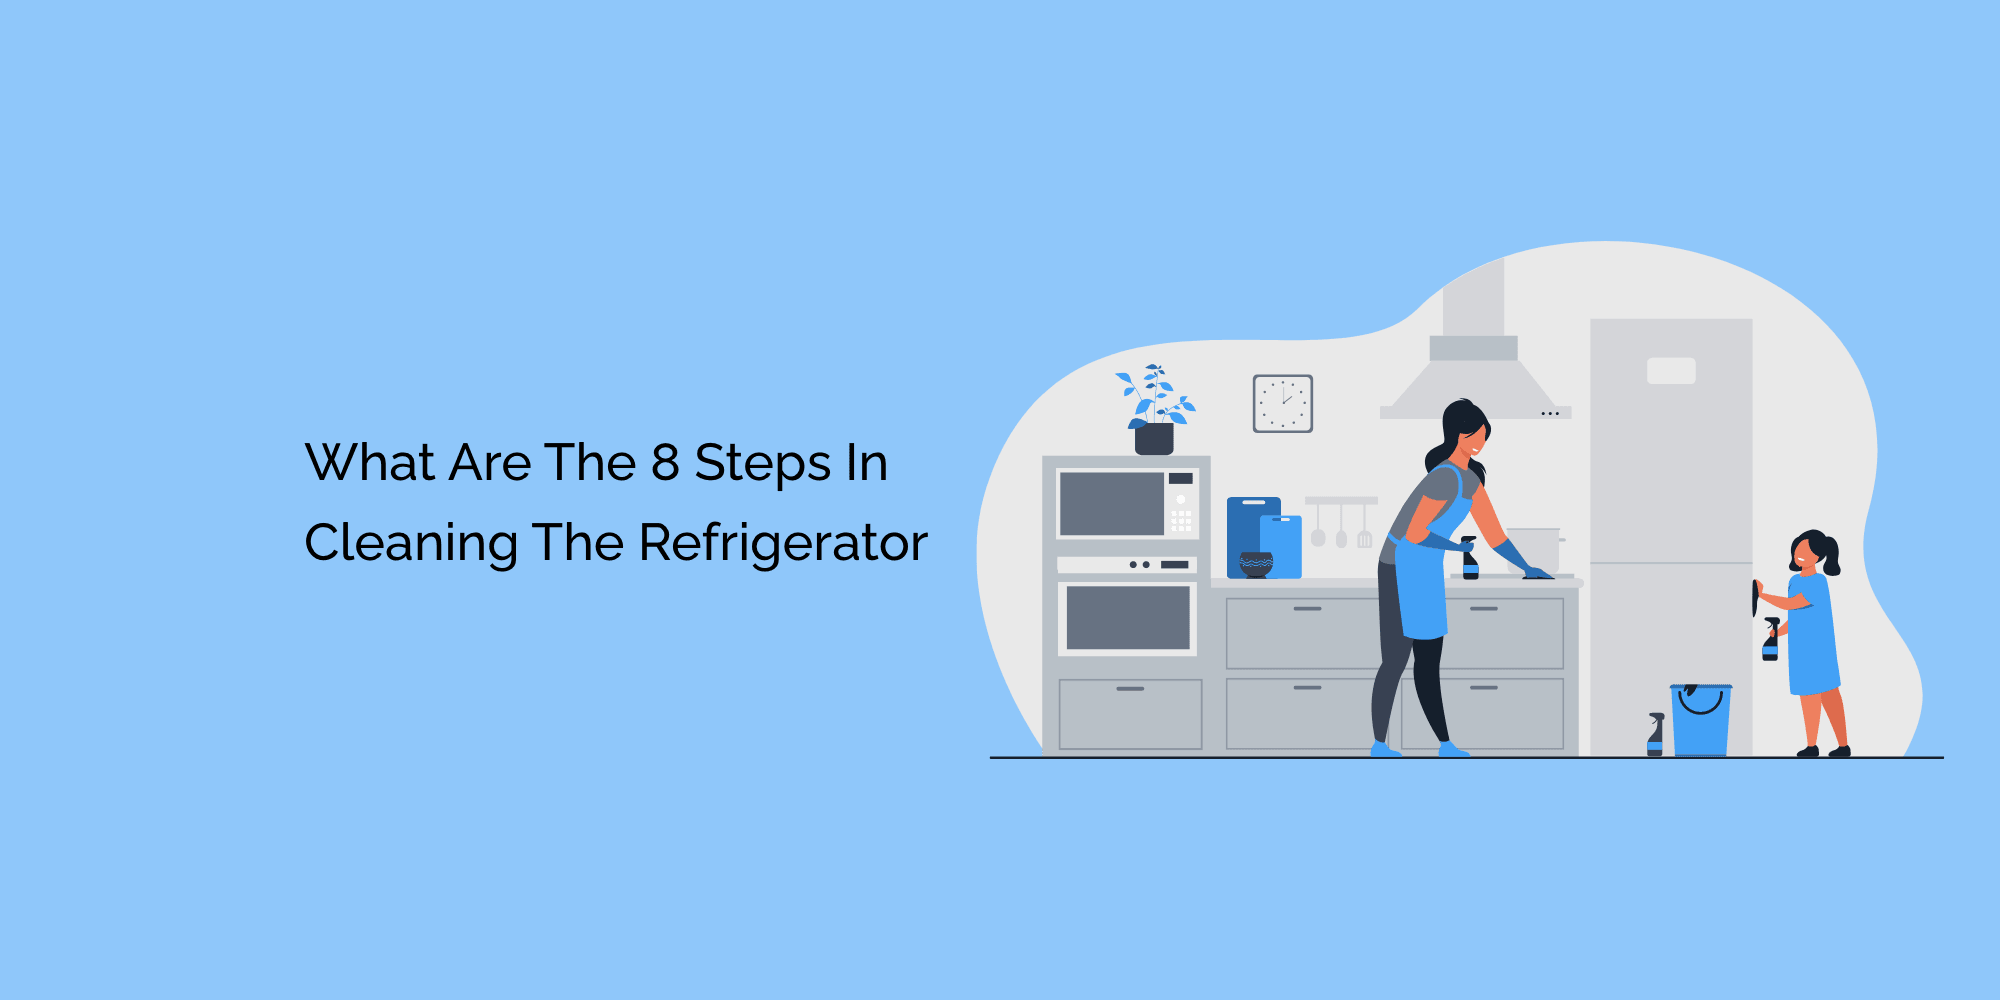 What Are The 8 Steps In Cleaning The Refrigerator